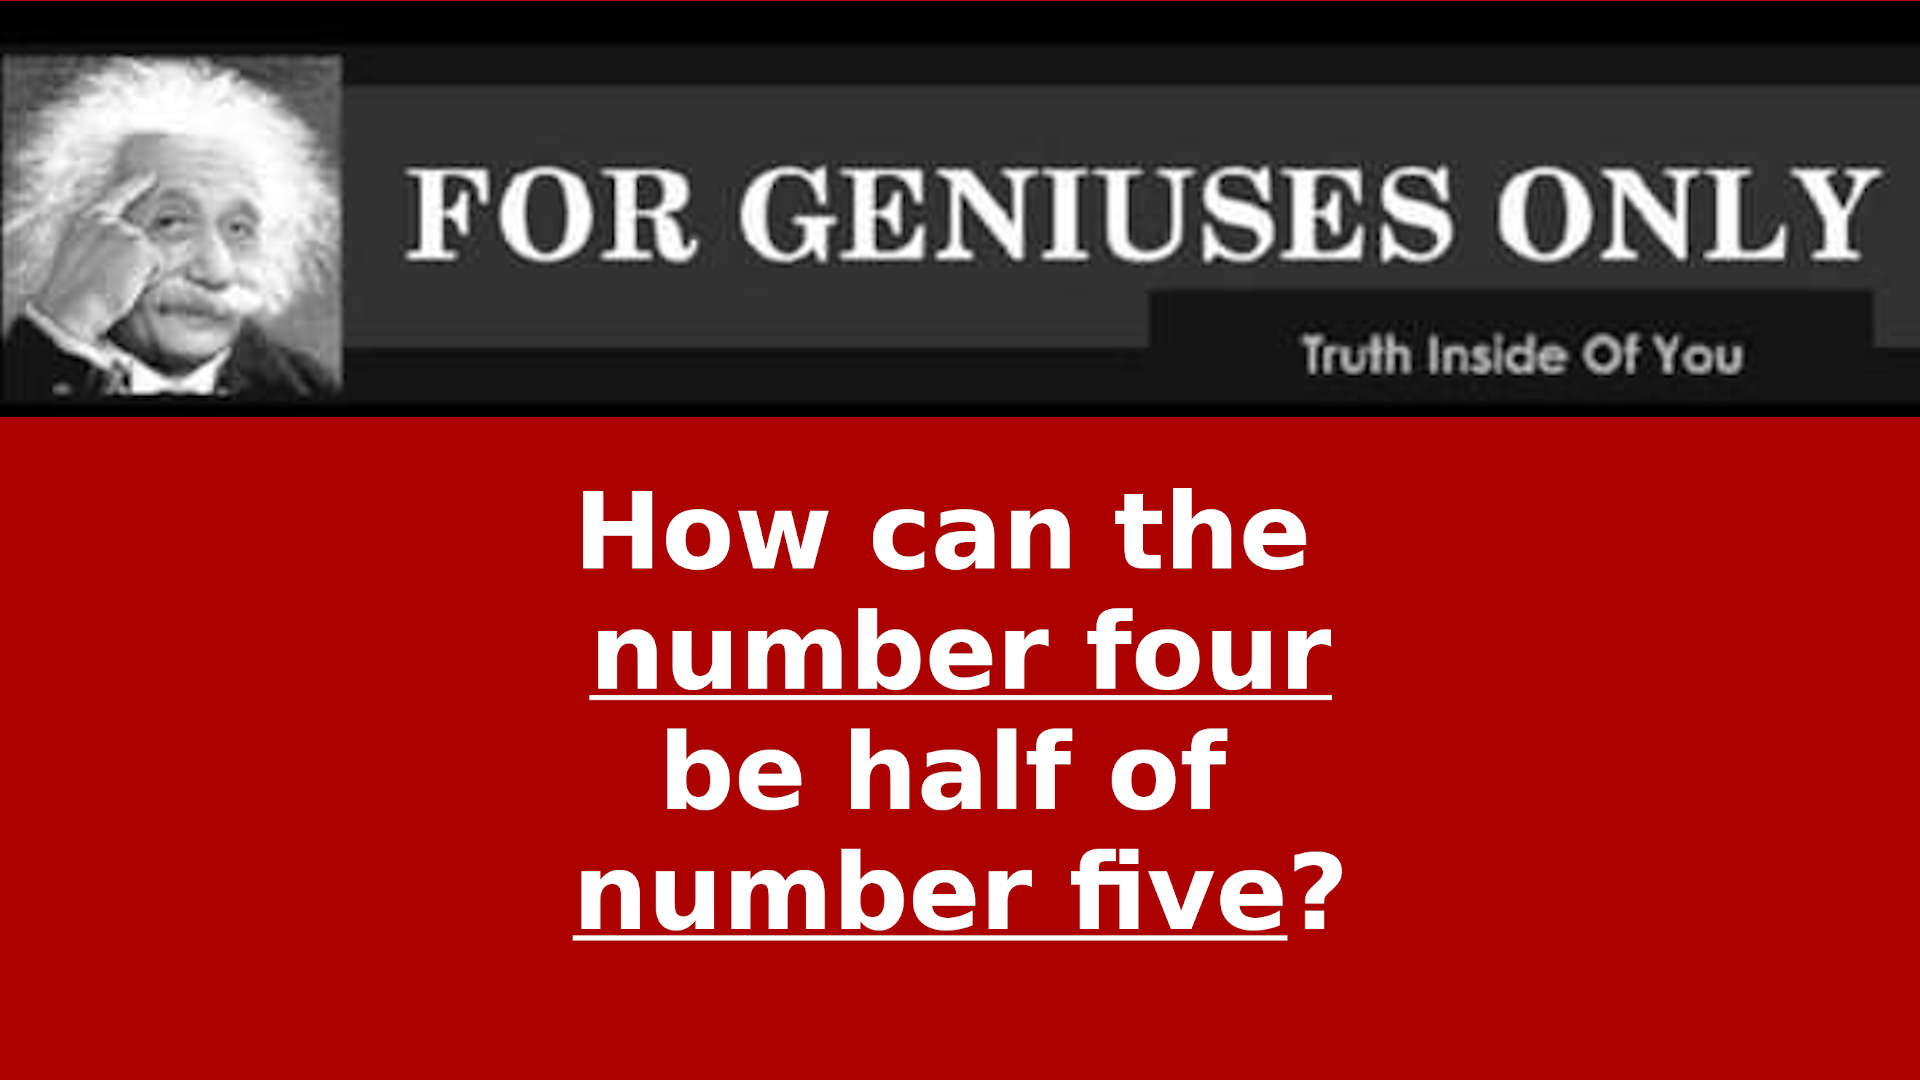 How can the number four be half of number five?